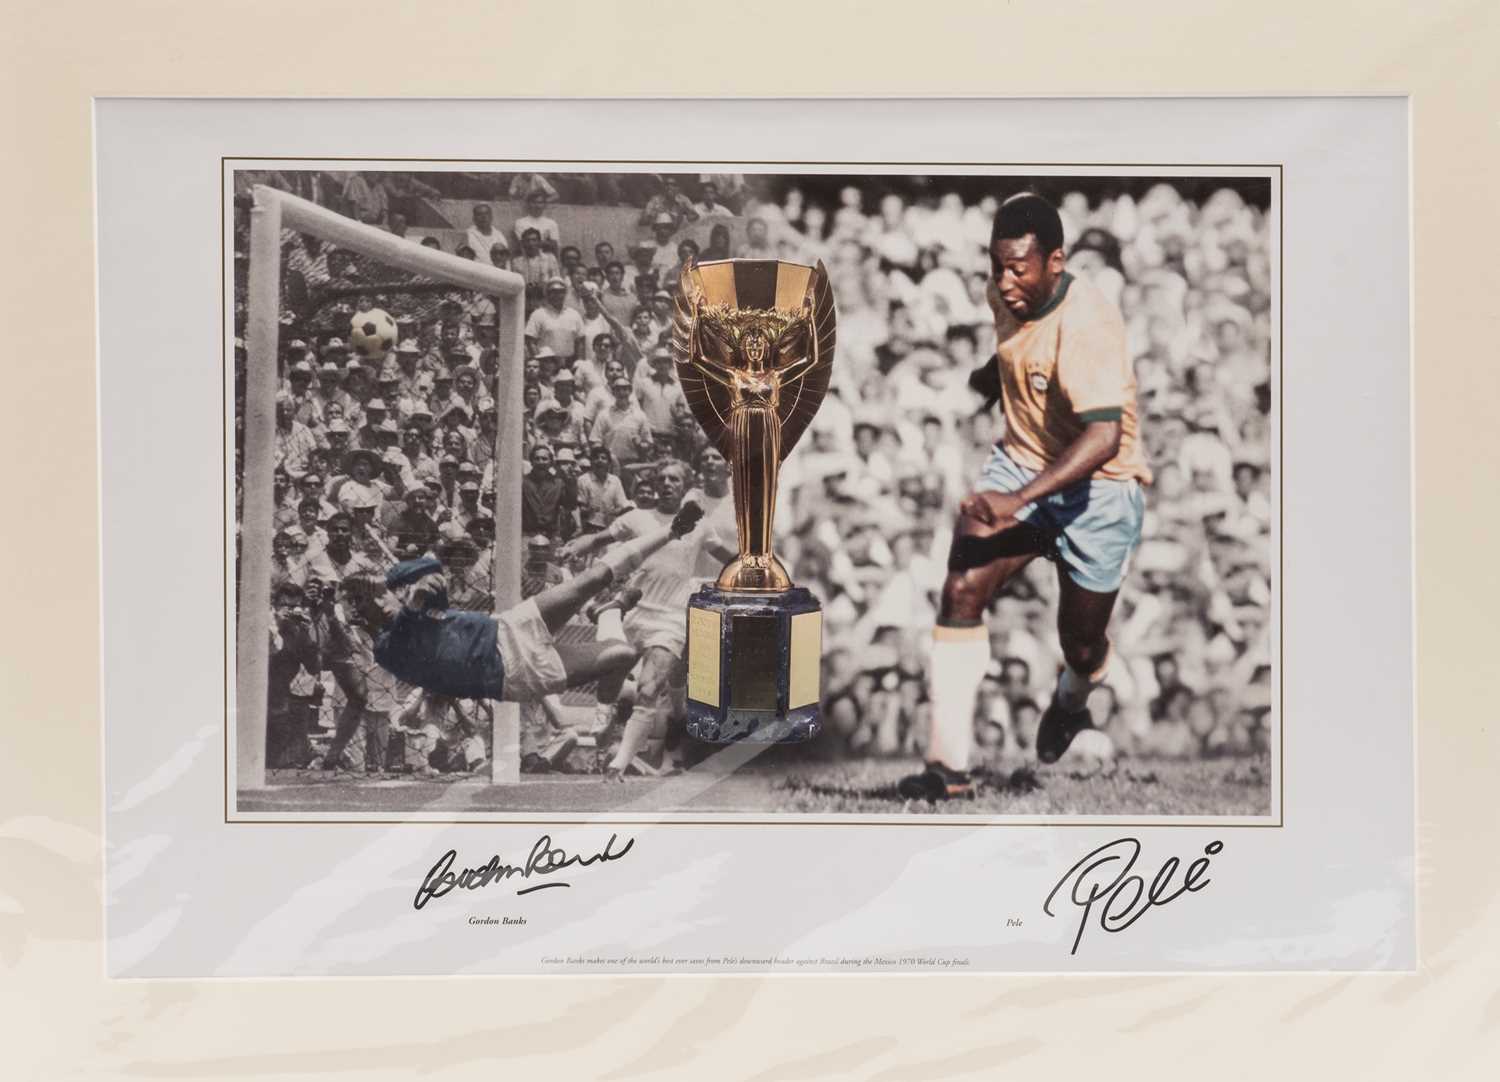 FOOTBALL INTEREST PHOTOGRAPHIC PRINTS including b/w photo of Pelé playing for Brazil, the print - Image 4 of 4